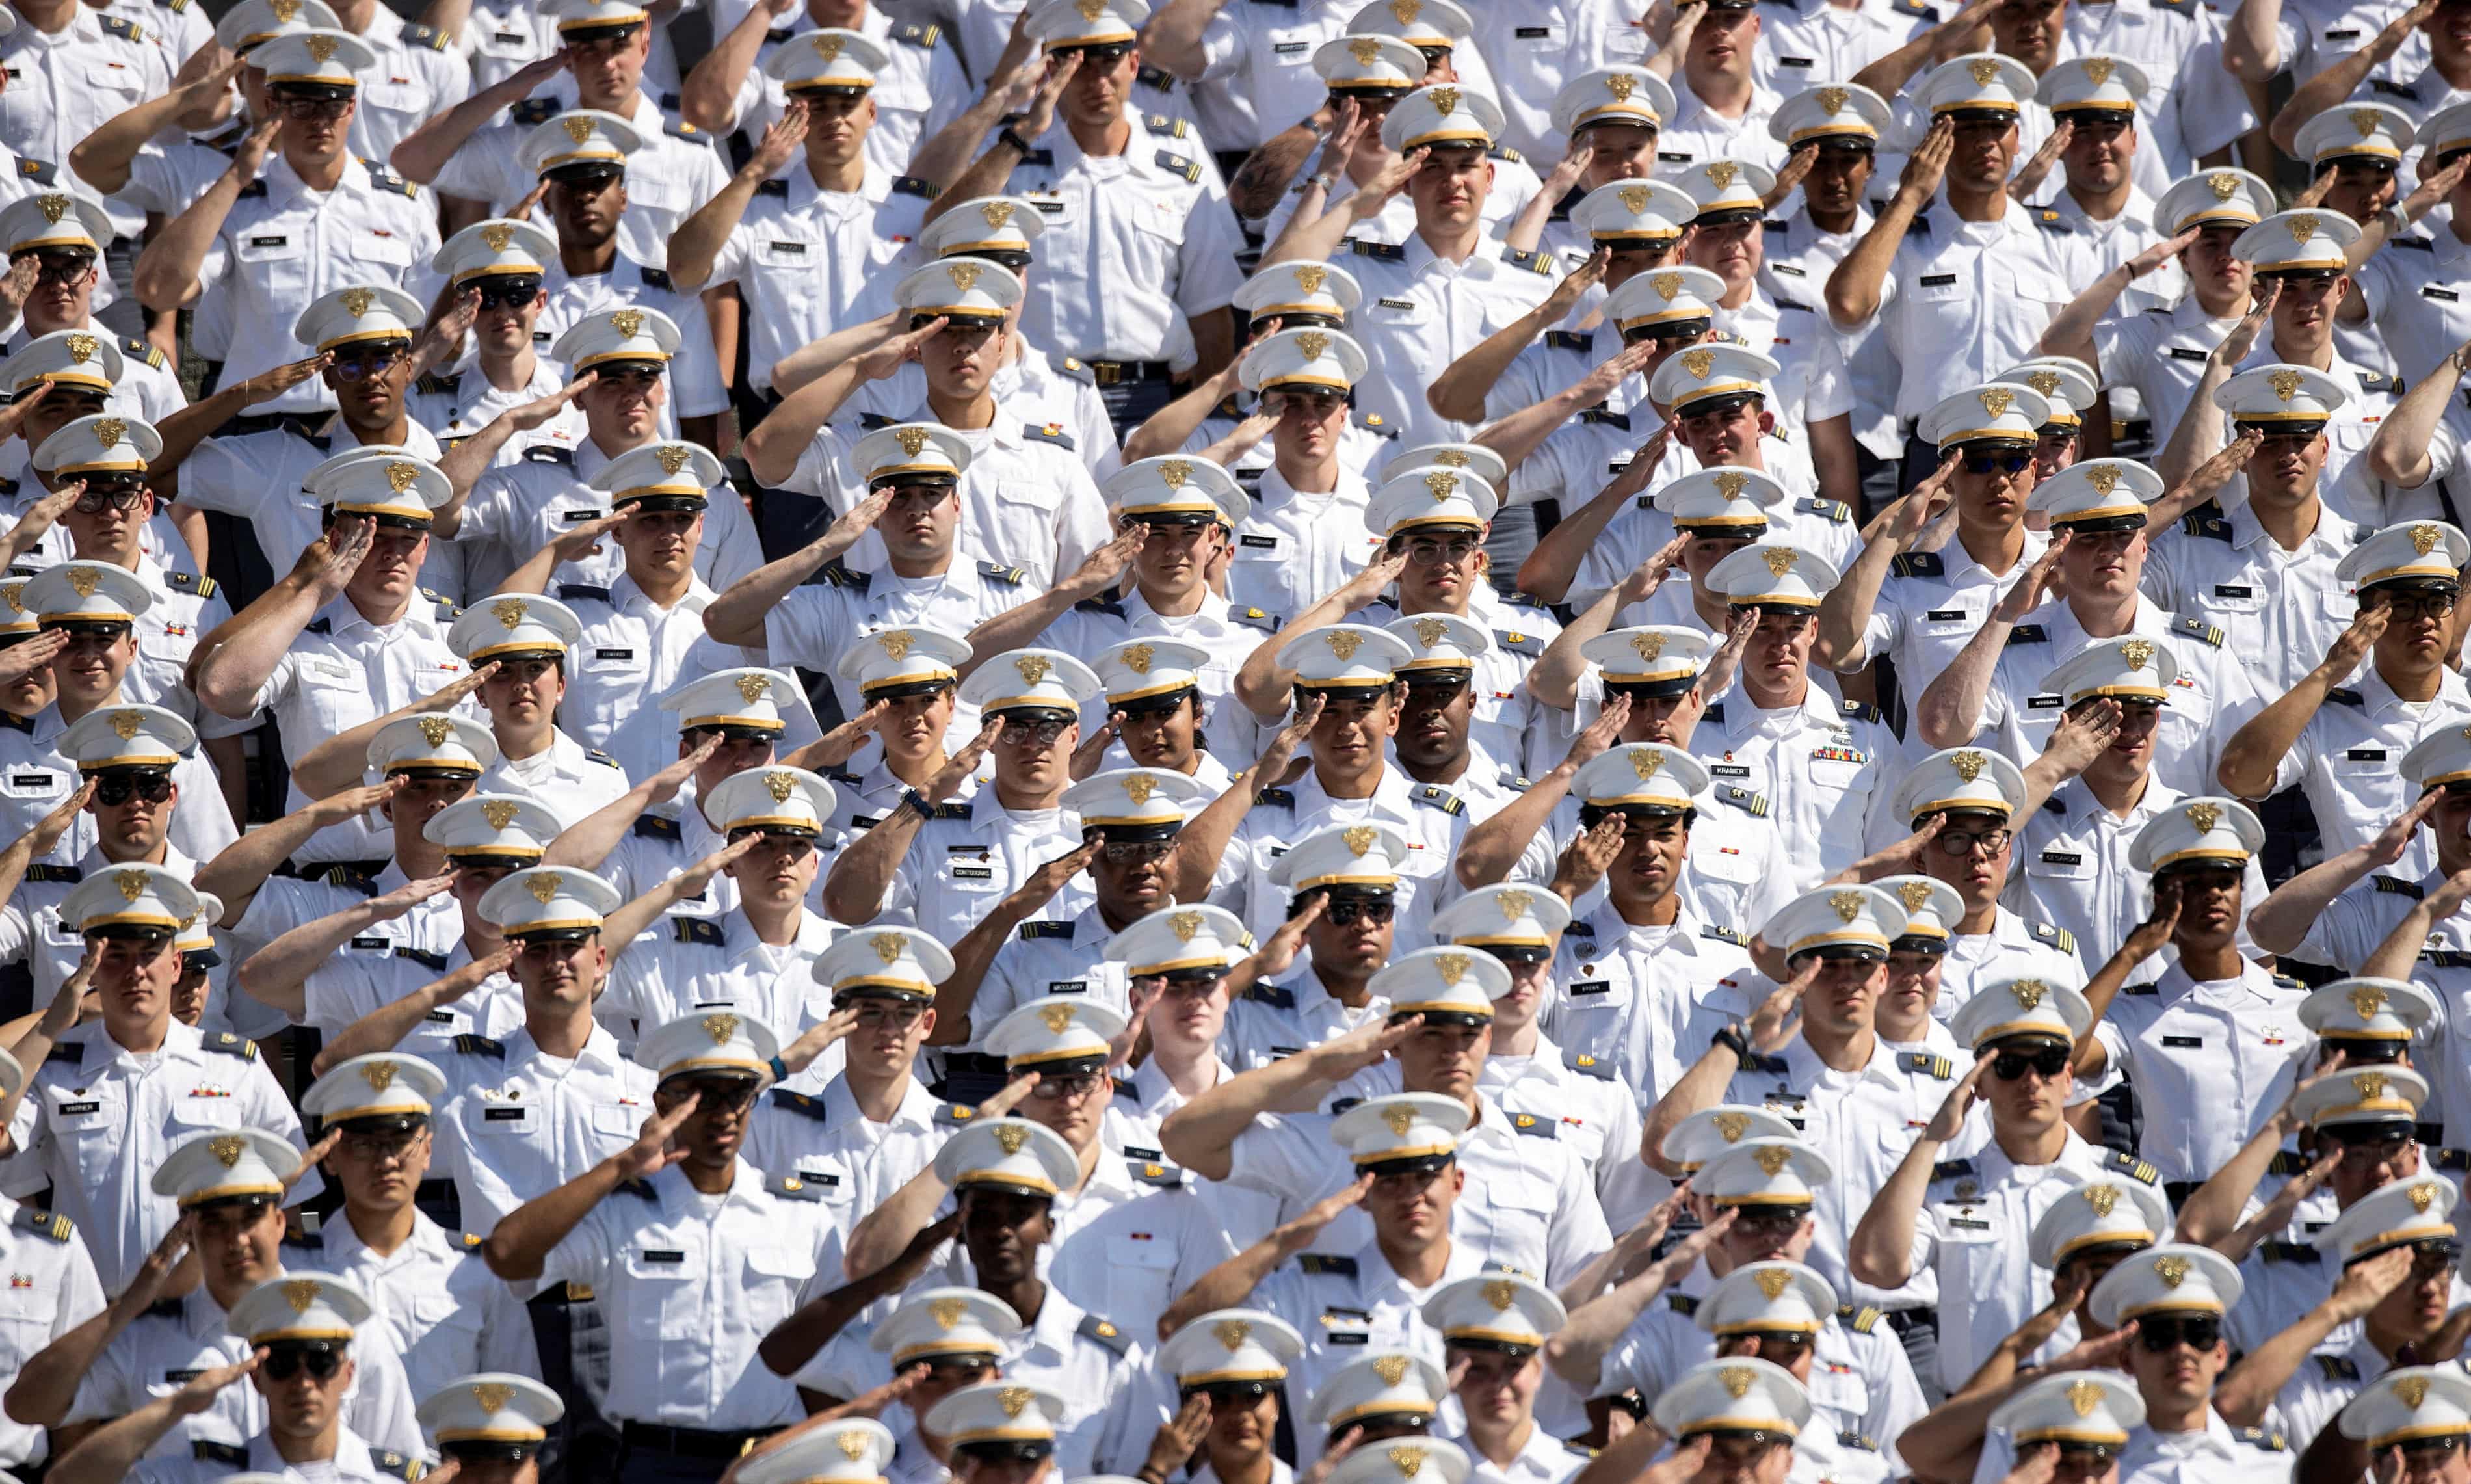 US supreme court allows West Point to continue considering race in admissions (theguardian.com)